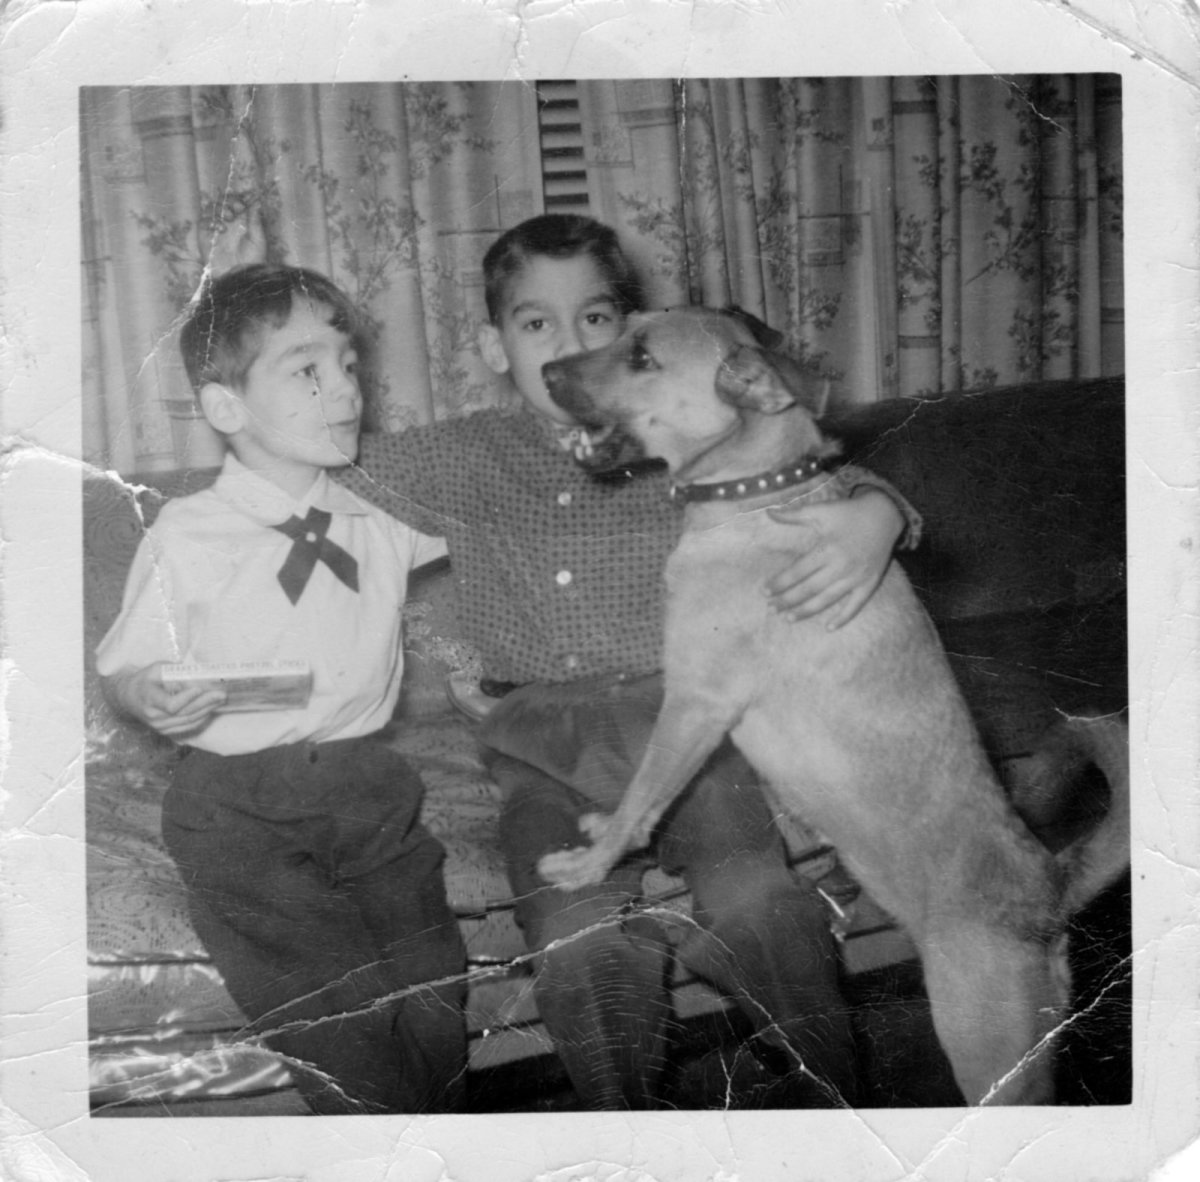 Memories of a first childhood pet, a dog named 